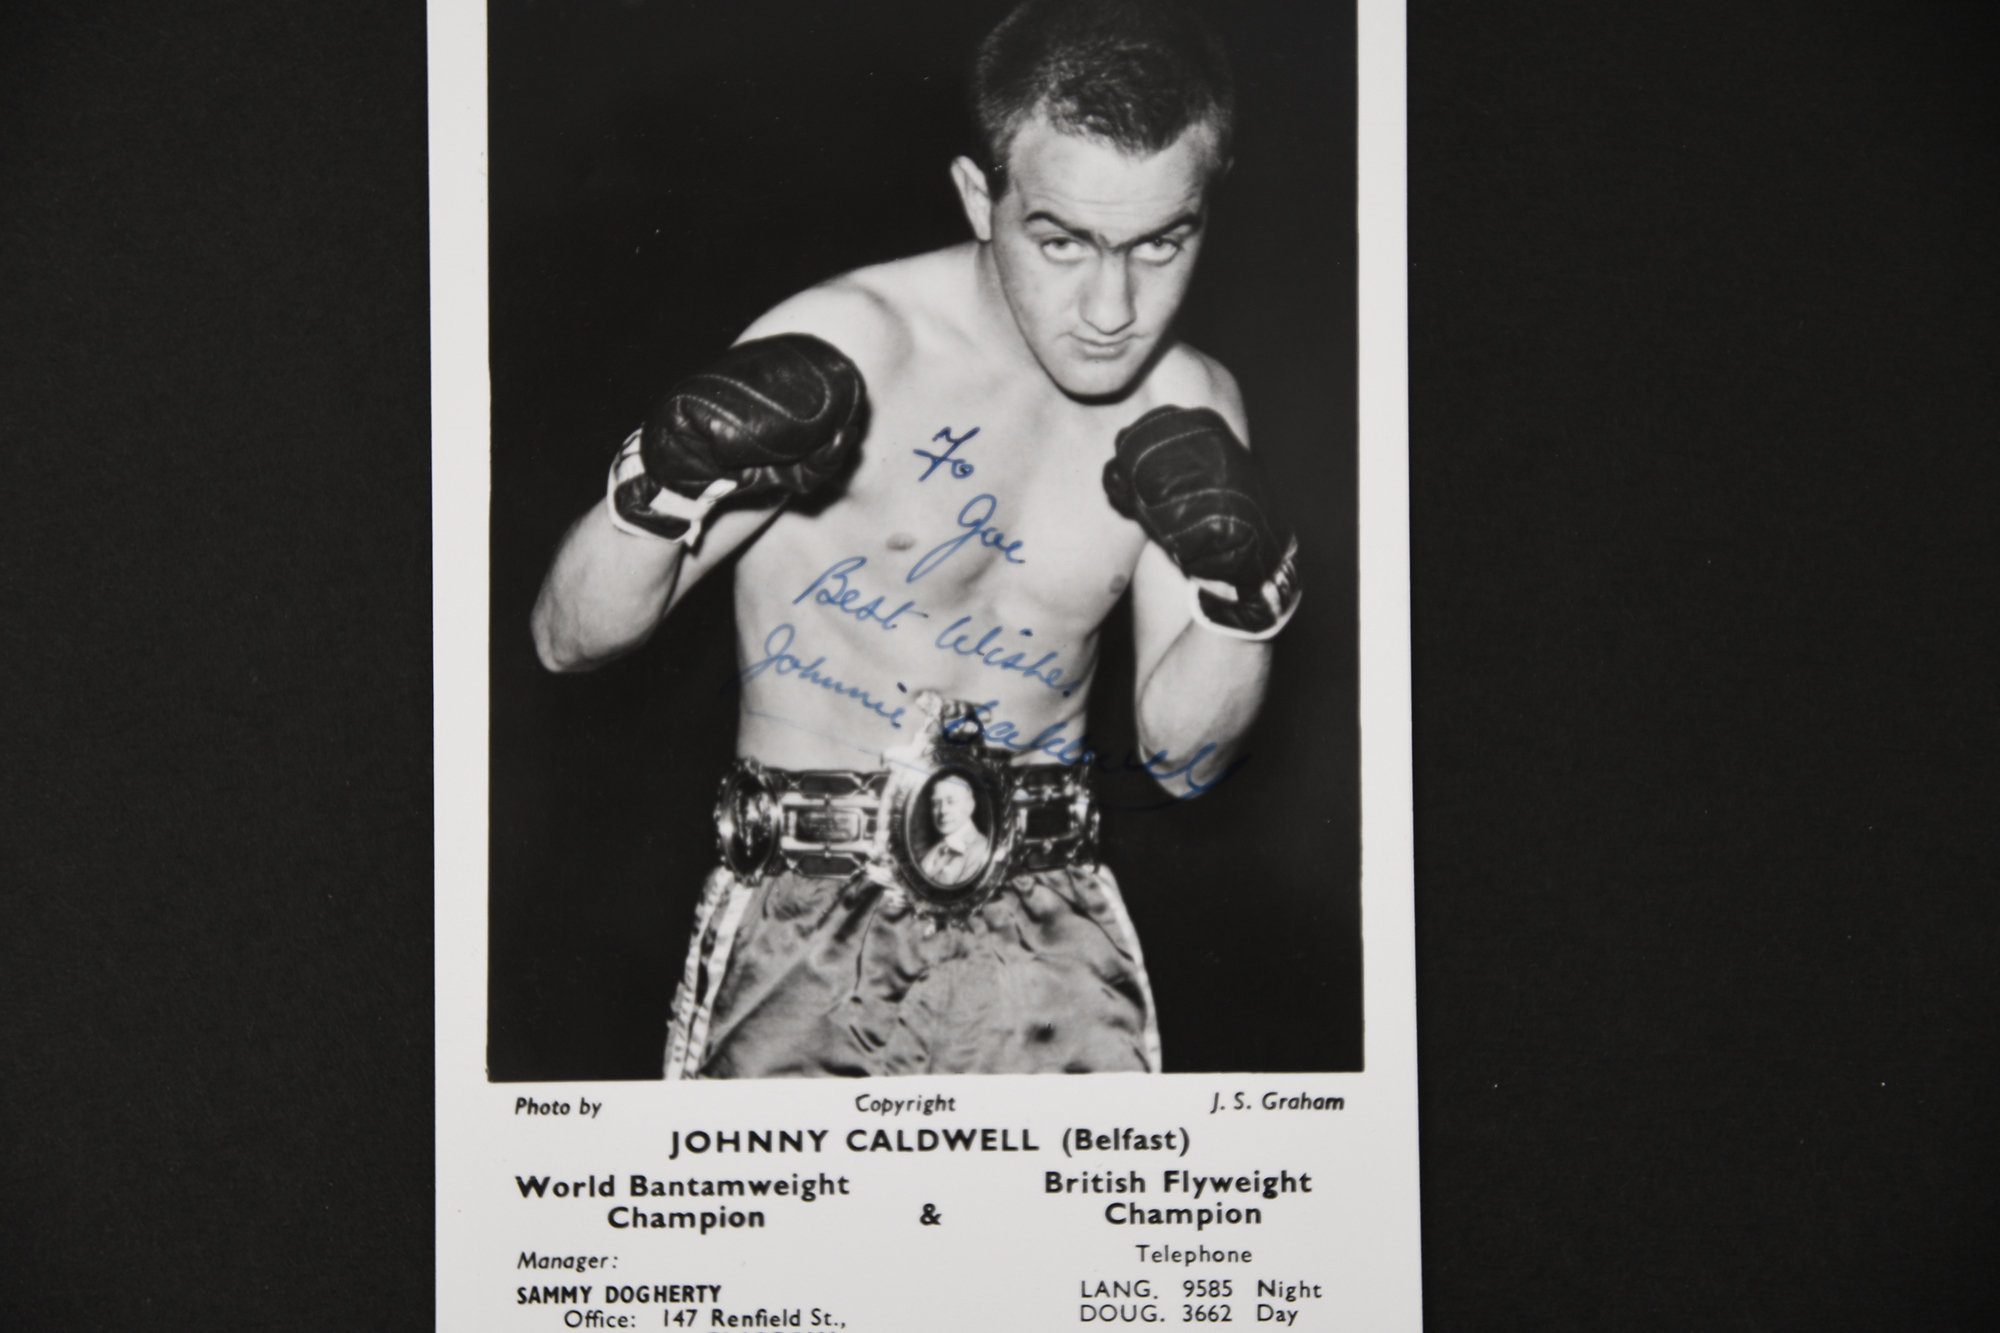 HENRY COOPER & JOE BUGNER etc. Various Boxing cards with original signatures on photo. - Image 7 of 10